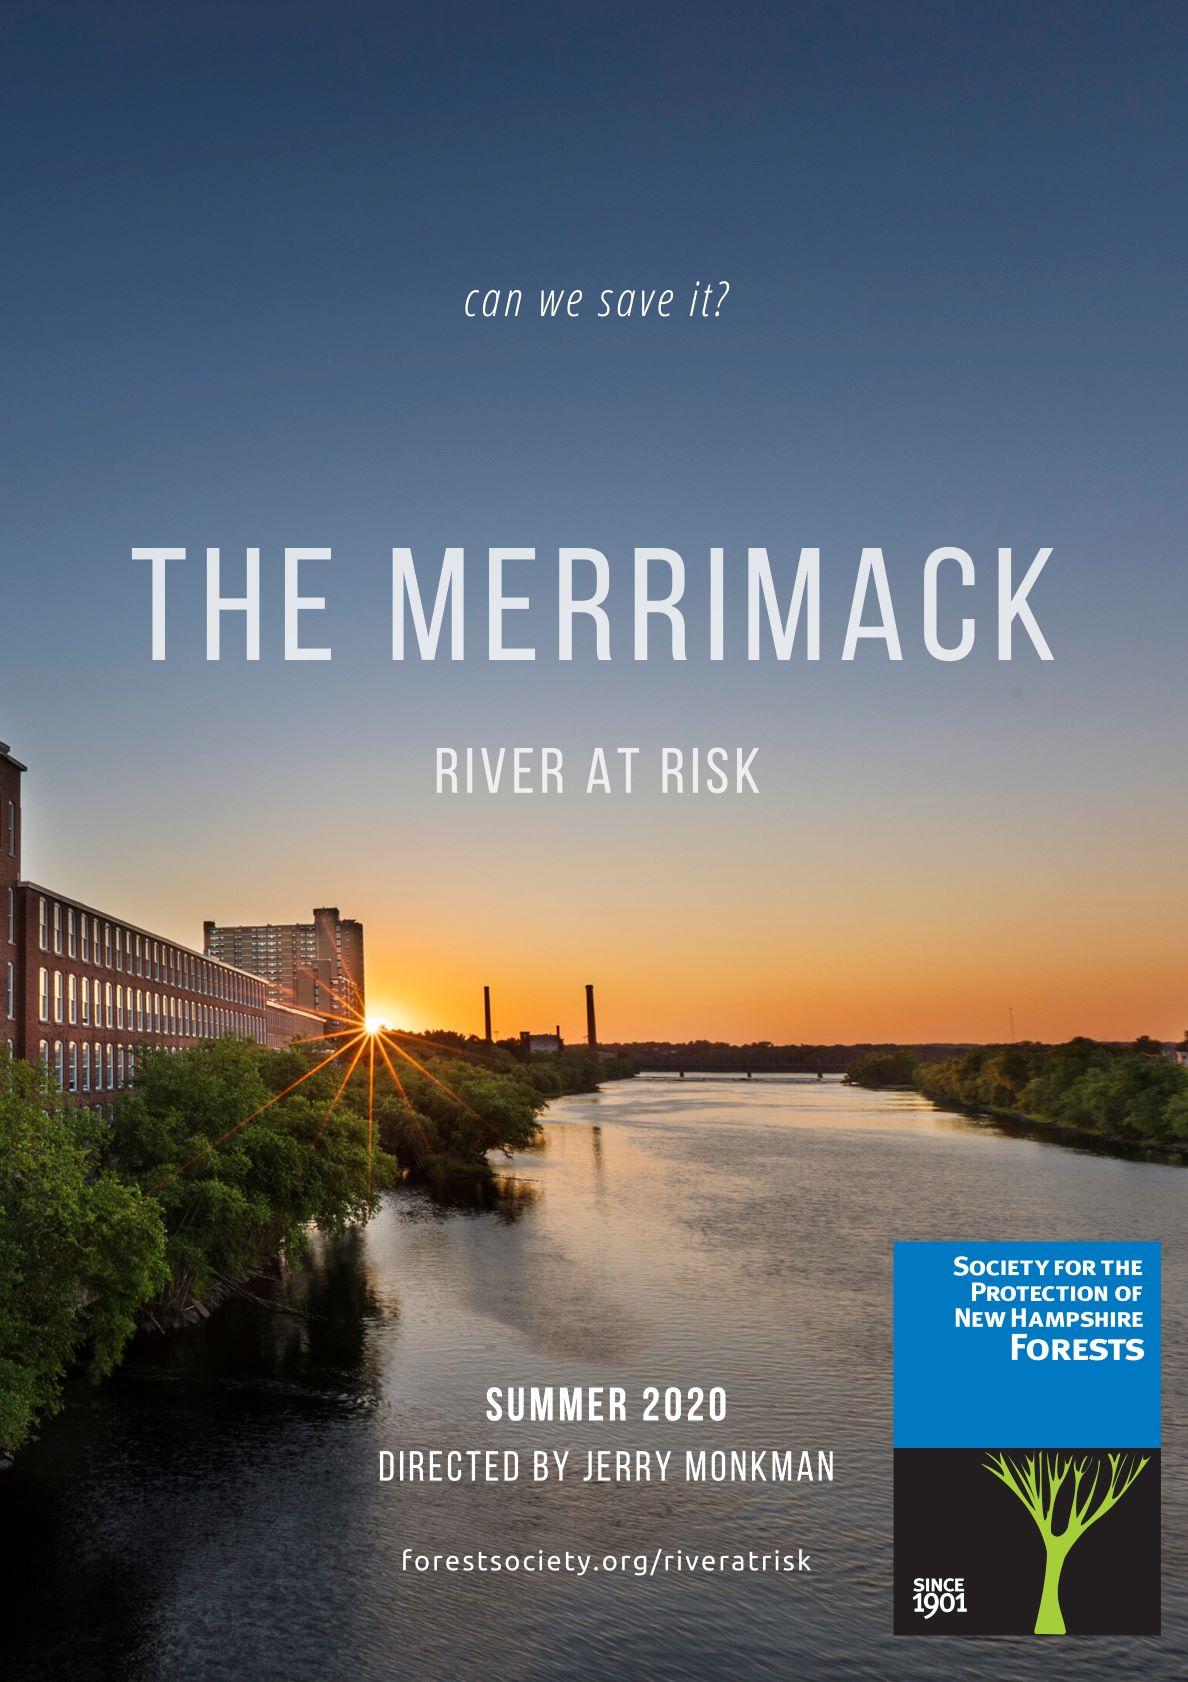 The poster for the movie The Merrimack has a river next to a mill building.